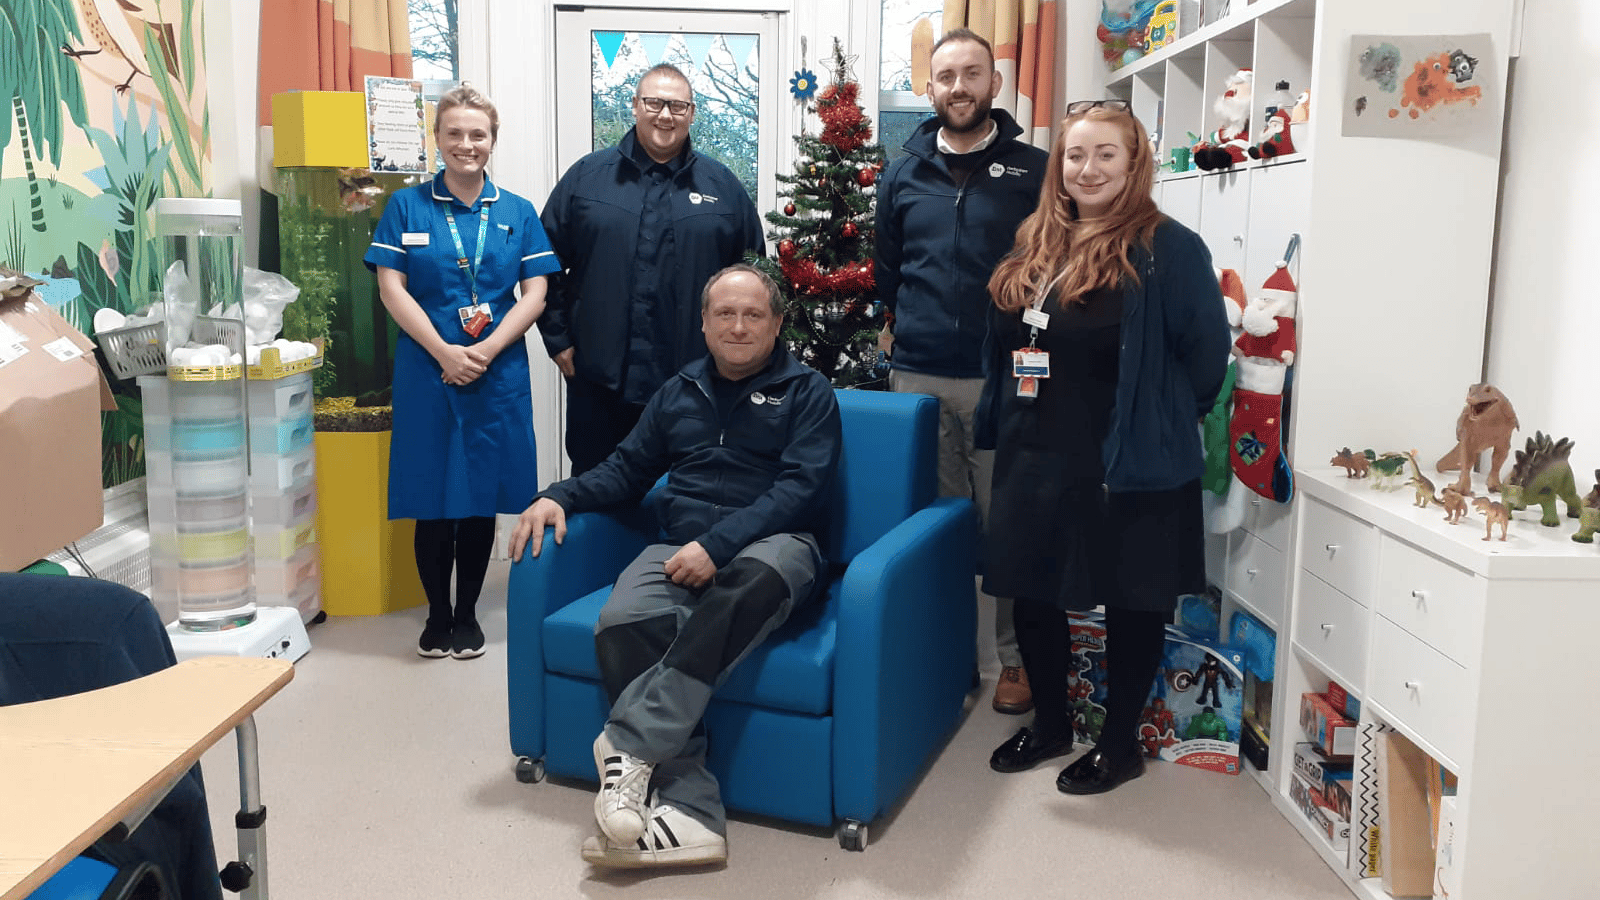 Craig, Rob, and Wayne from Derbyshire Mobility at Ryegate Children's Hospice in Sheffield, who won the Repose Stargazer Chair Competition.